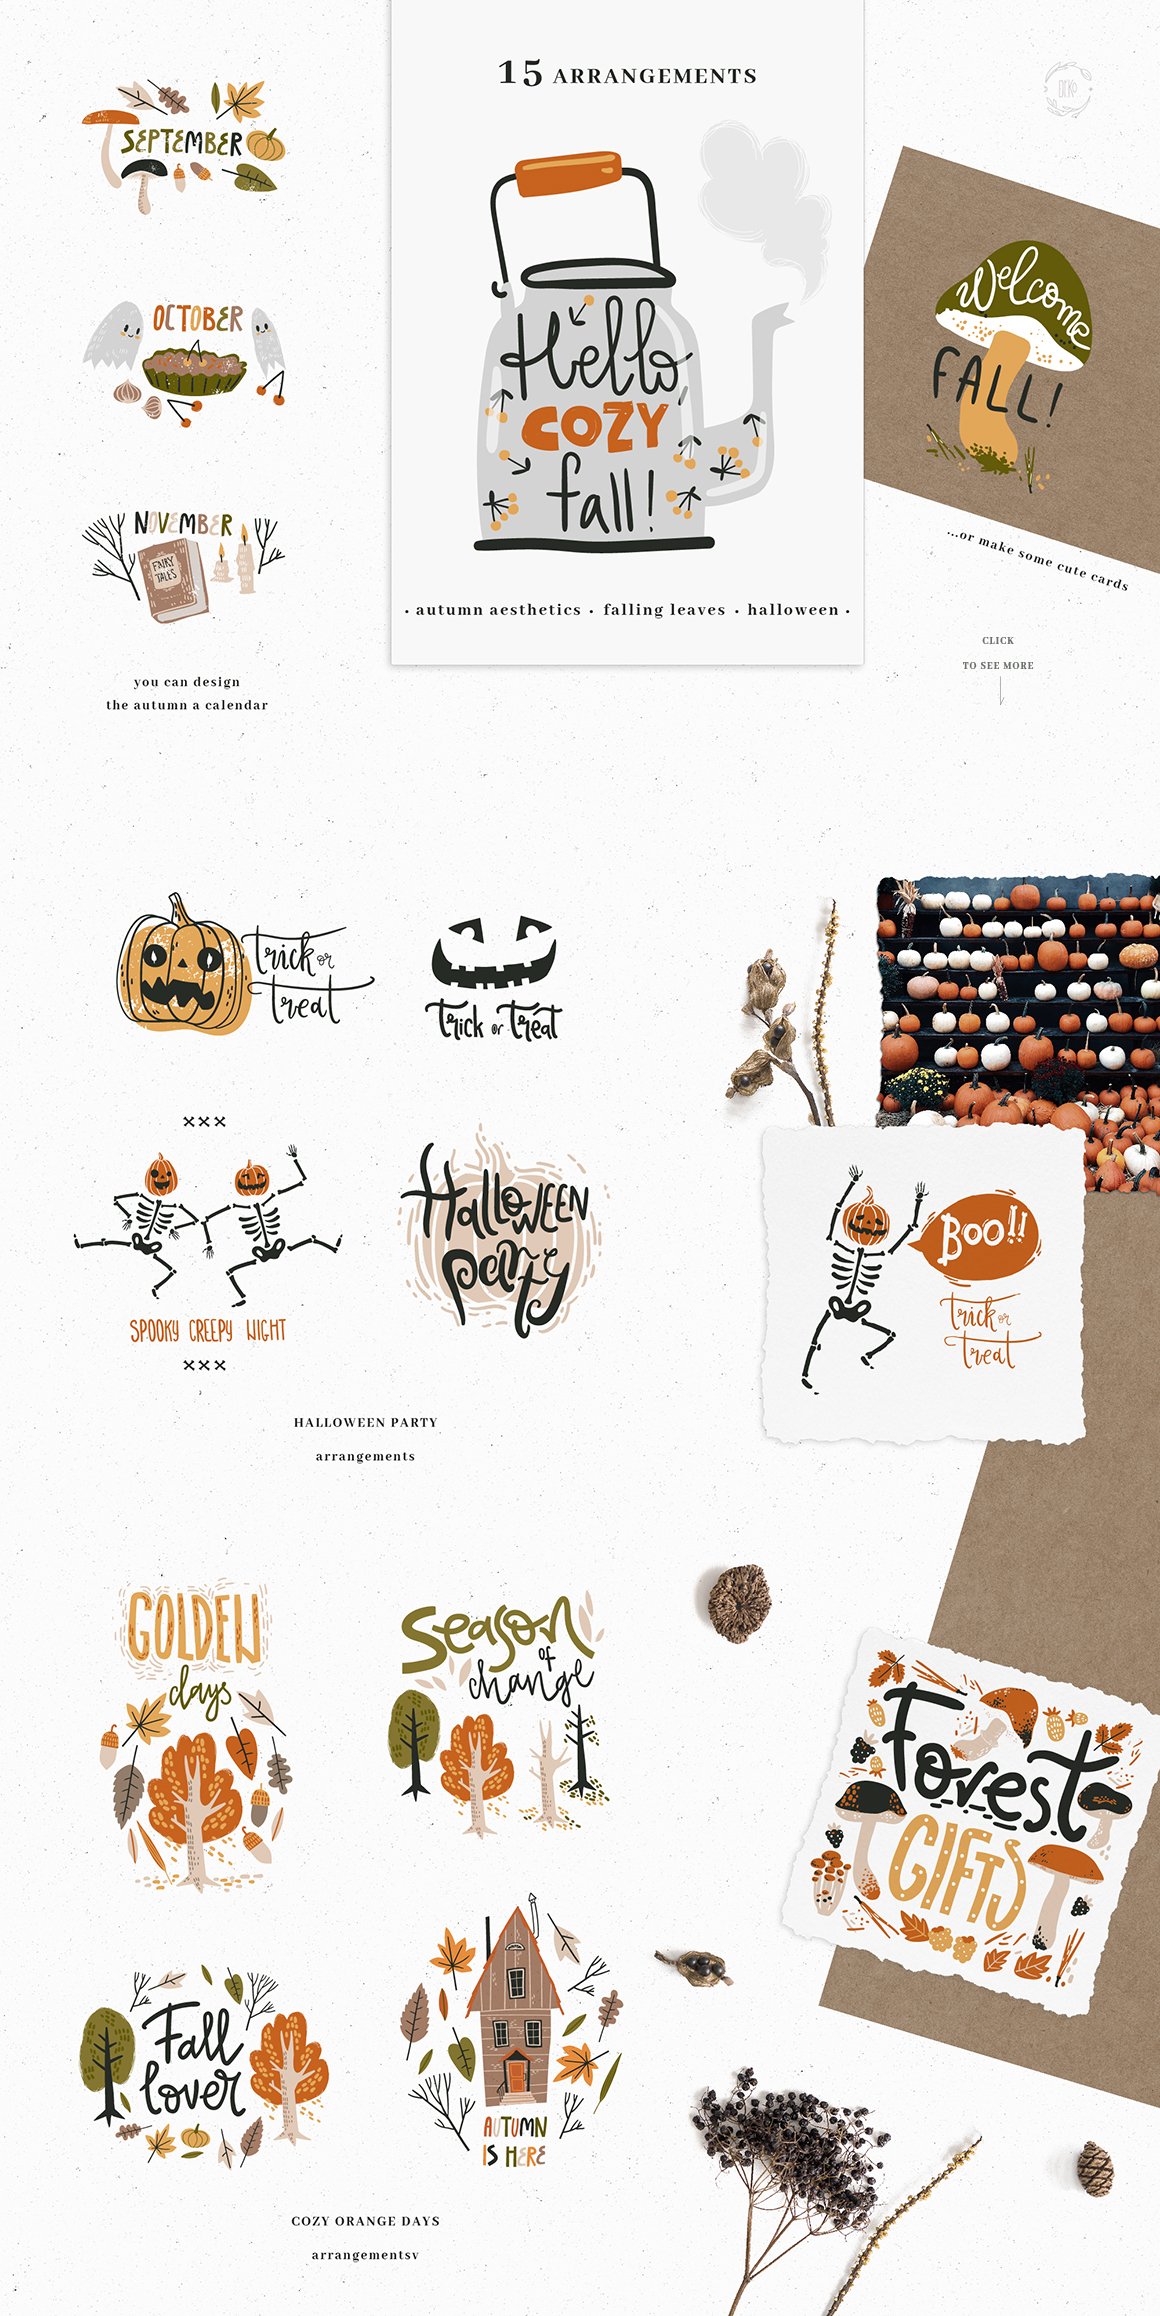 Cozy-Cozy Fall Clipart Collection